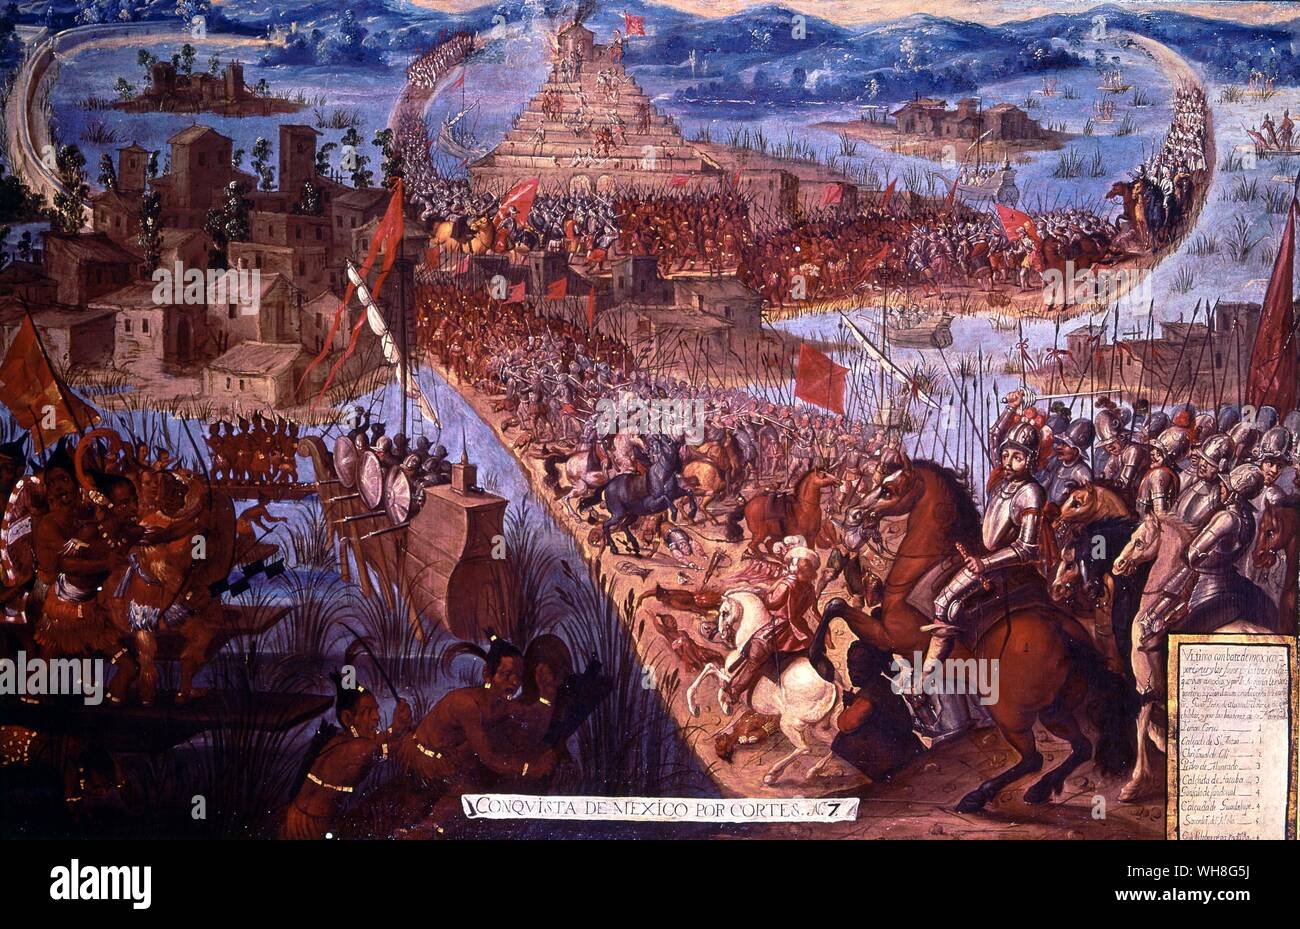 The Conquest of Tenochtitlán, unknown artist, from The Conquistadors by Hammond Innes, page 142. The painting shows the conquest of Tenochtitlán (now the site of Mexico City). The battle between the Spanish under Hernán(do) Cortés, marqués del Valle de Oaxaca (1484-1547) and the Mexica under the last Aztec leader Cuauhtémoc (c.1502-1525) is more properly called a siege. It began in May of 1521 and lasted into August. With newly built ships, the Spanish controlled the lake surrounding the island and blockaded the city. Ultimately Cortés ordered the complete destruction of Tenochtitlán, Stock Photo